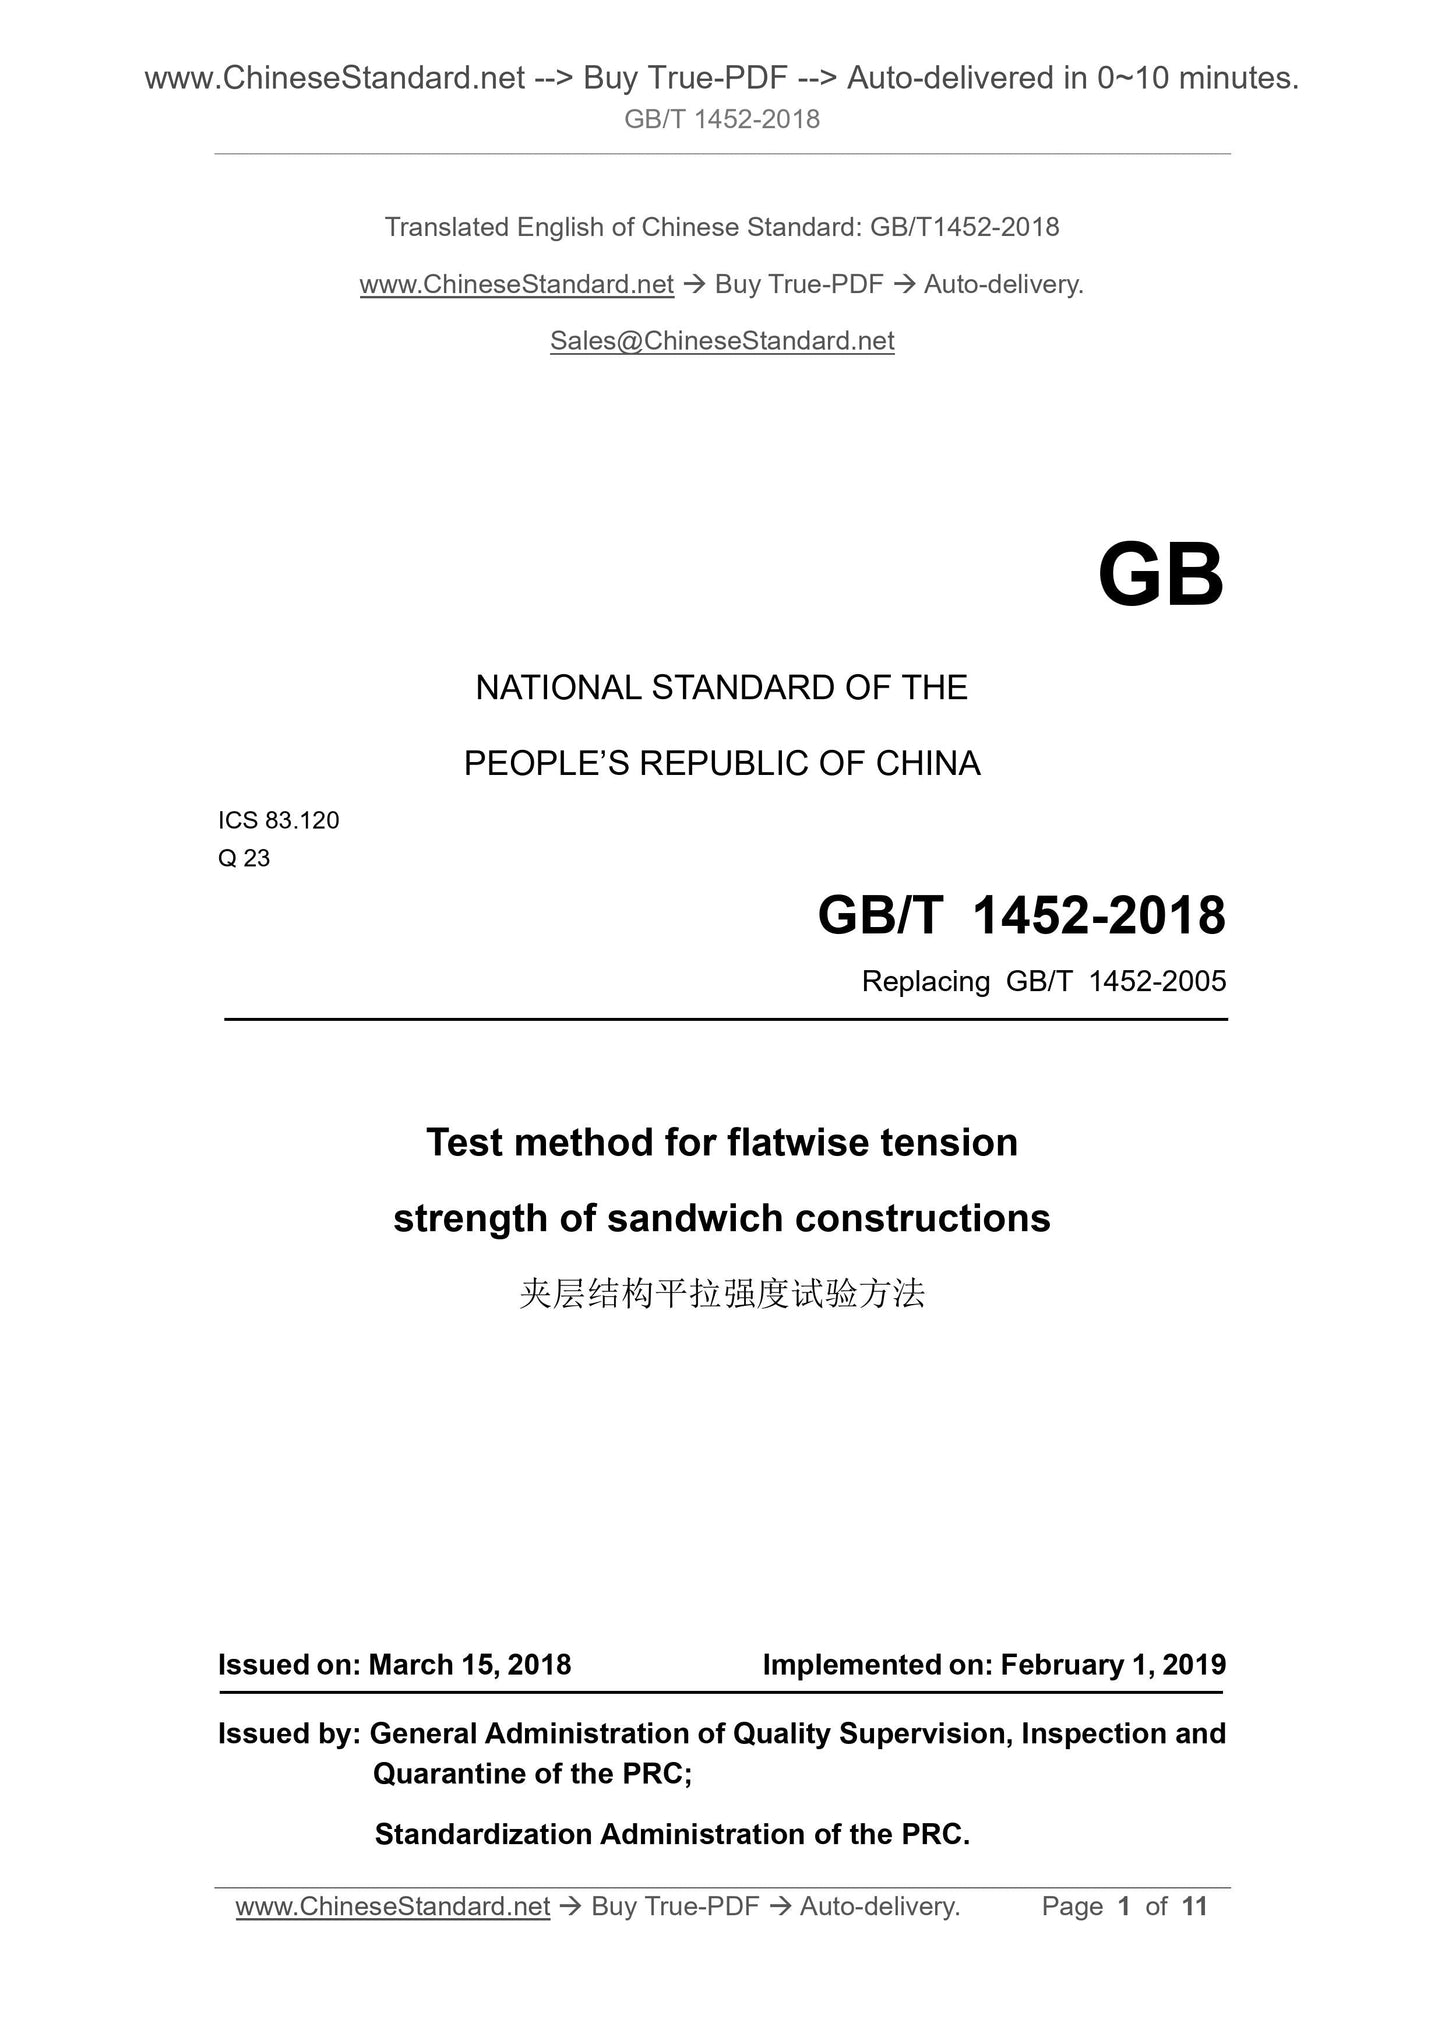 GB/T 1452-2018 Page 1